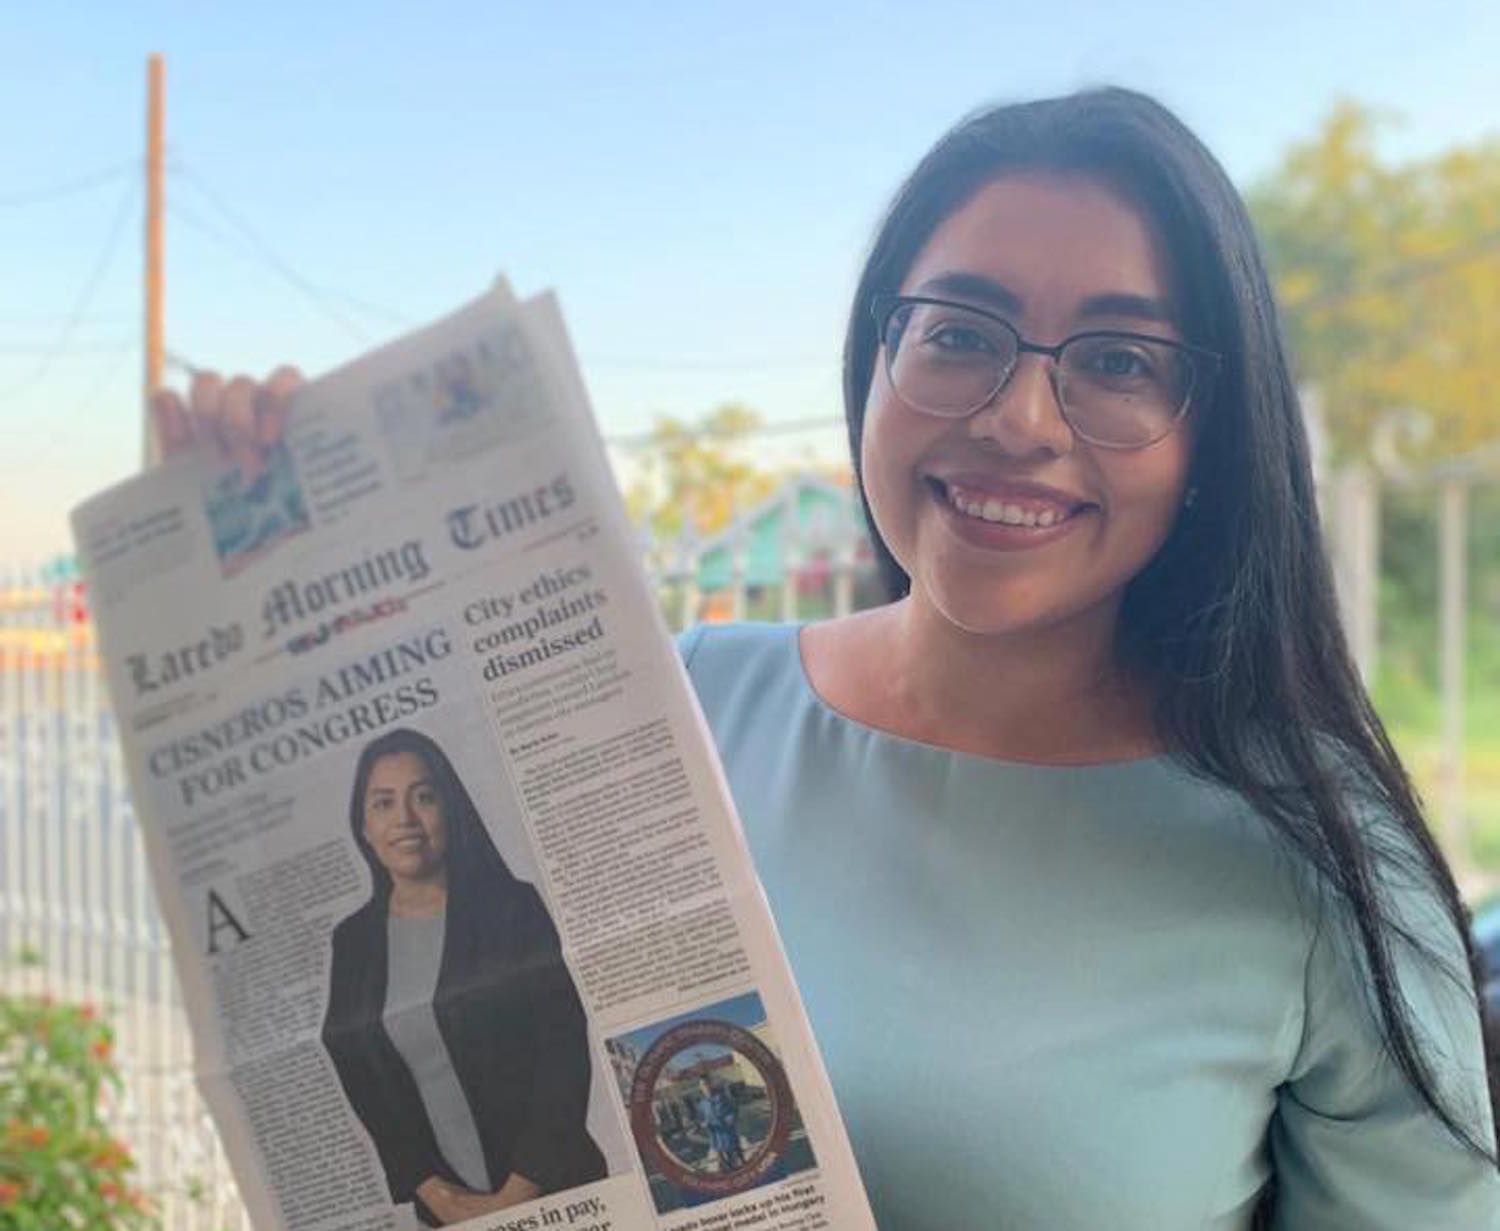 Jessica Cisneros holds up a newspaper with her face on it.